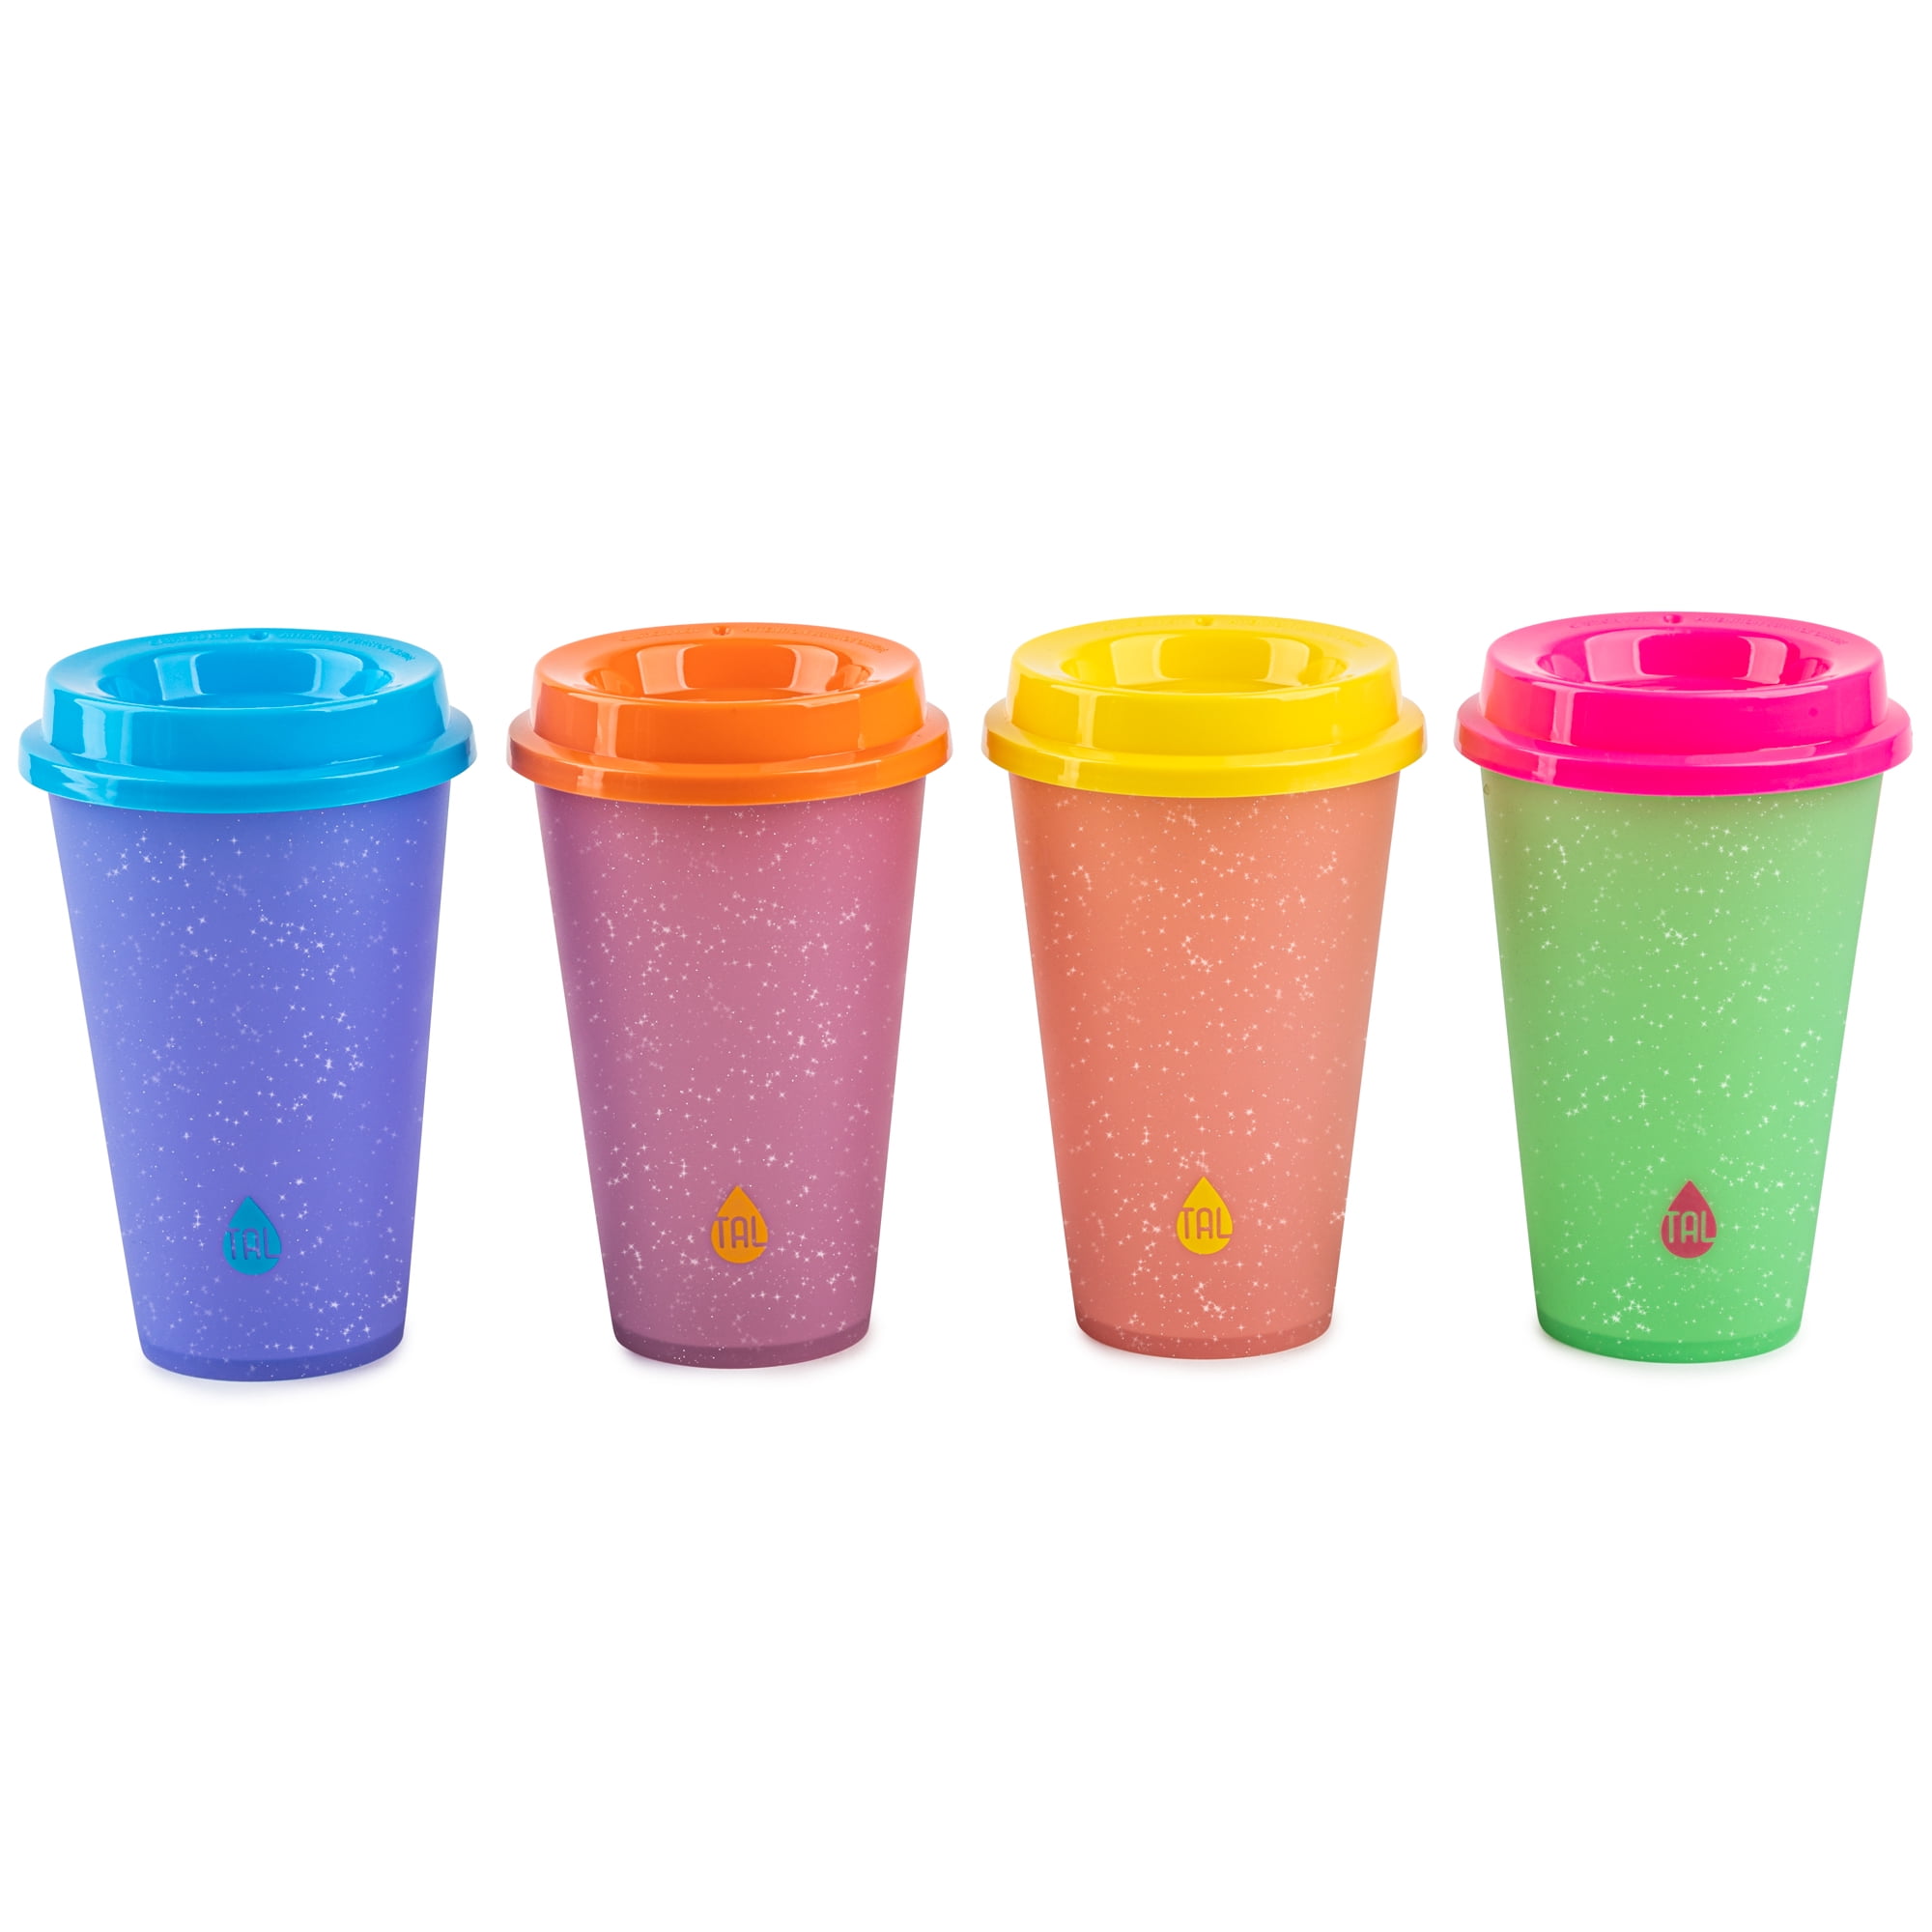 Double Wall Travel Mugs Set of 4 BPA Free Plastic Cups for Kids - Modified Flexible Straws and Firm Straws - Emojis 16 OZ Set of 2 Unique Insulated Tumblers with Lids and Straws 